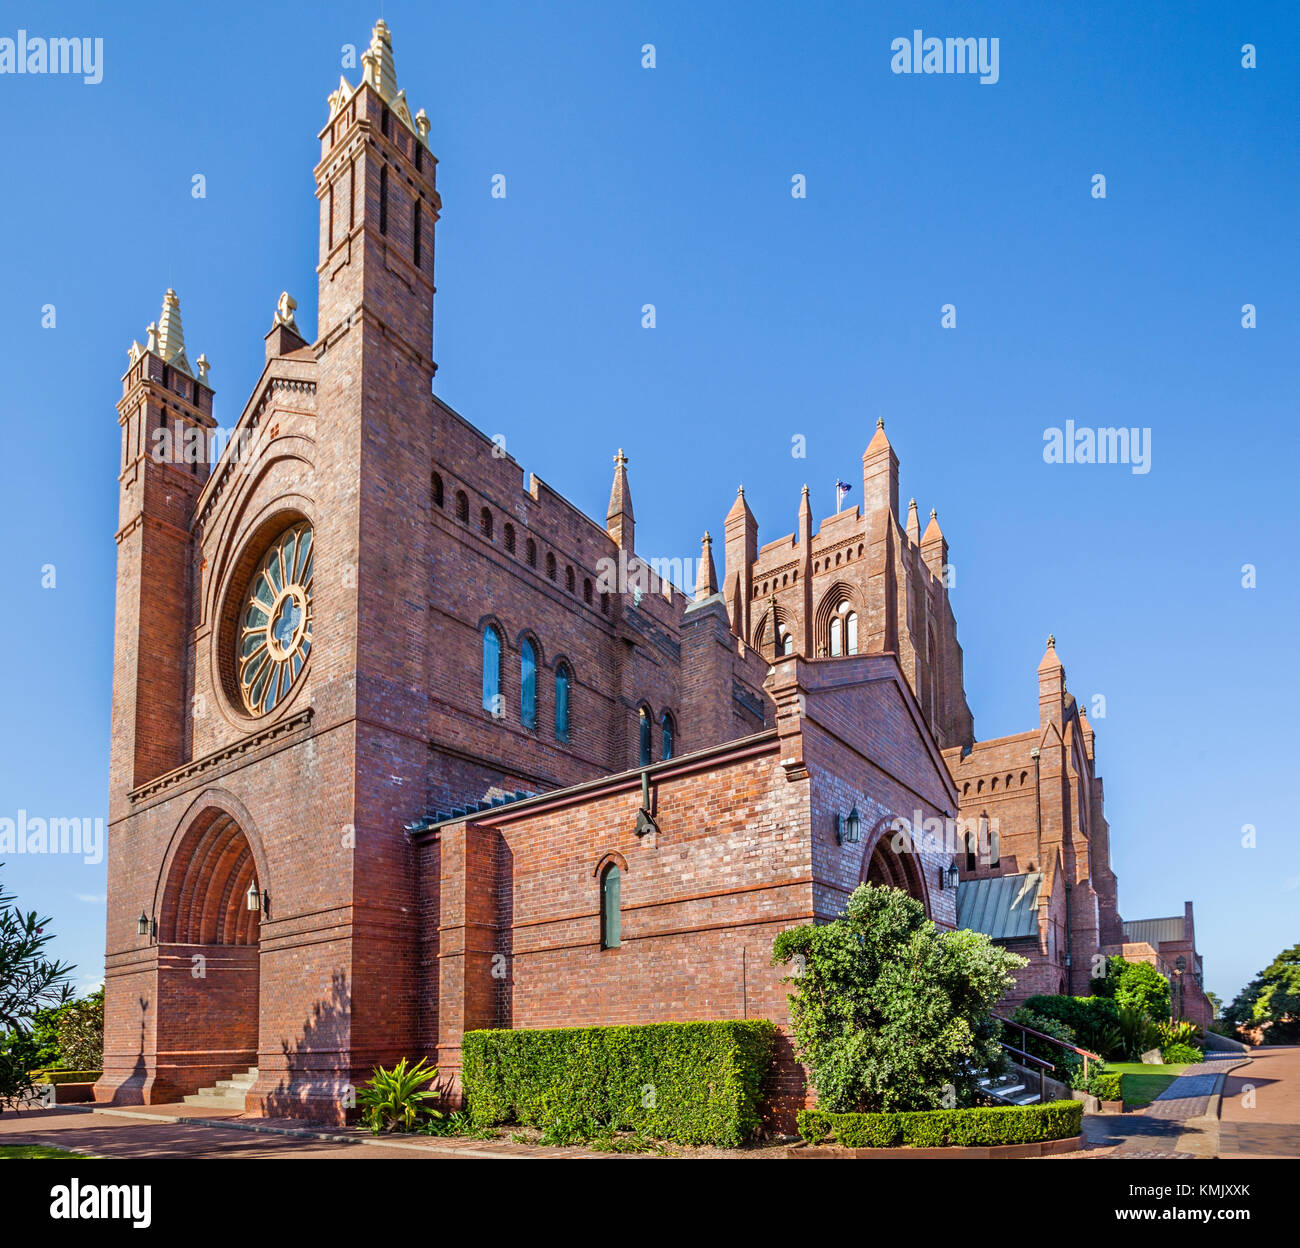 Australia, New South Wales, Newcastle, view of Gothic Revival style Christ Church Cathedral (or Cathedral Church of Christ the King) Stock Photo